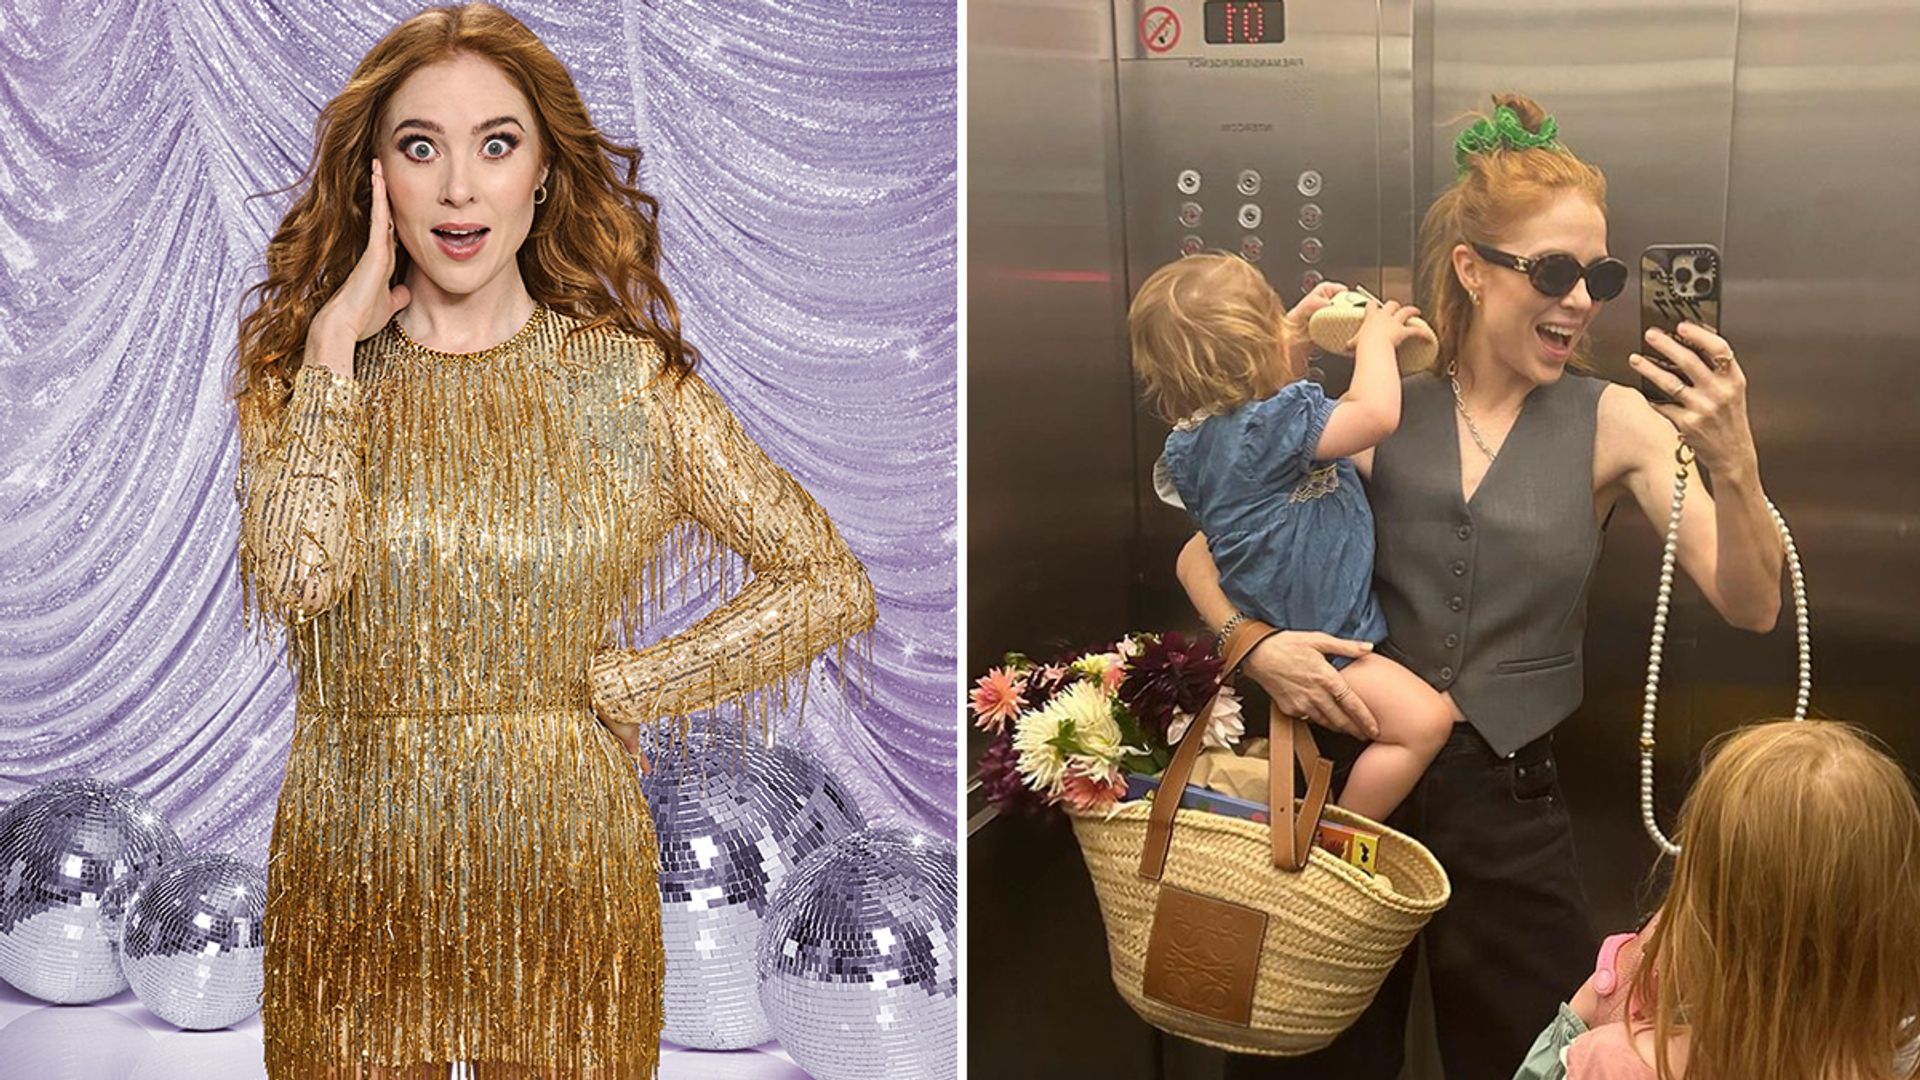 Split image of Angela Scanlon in Strictly costume and her with two young girls in an elevator